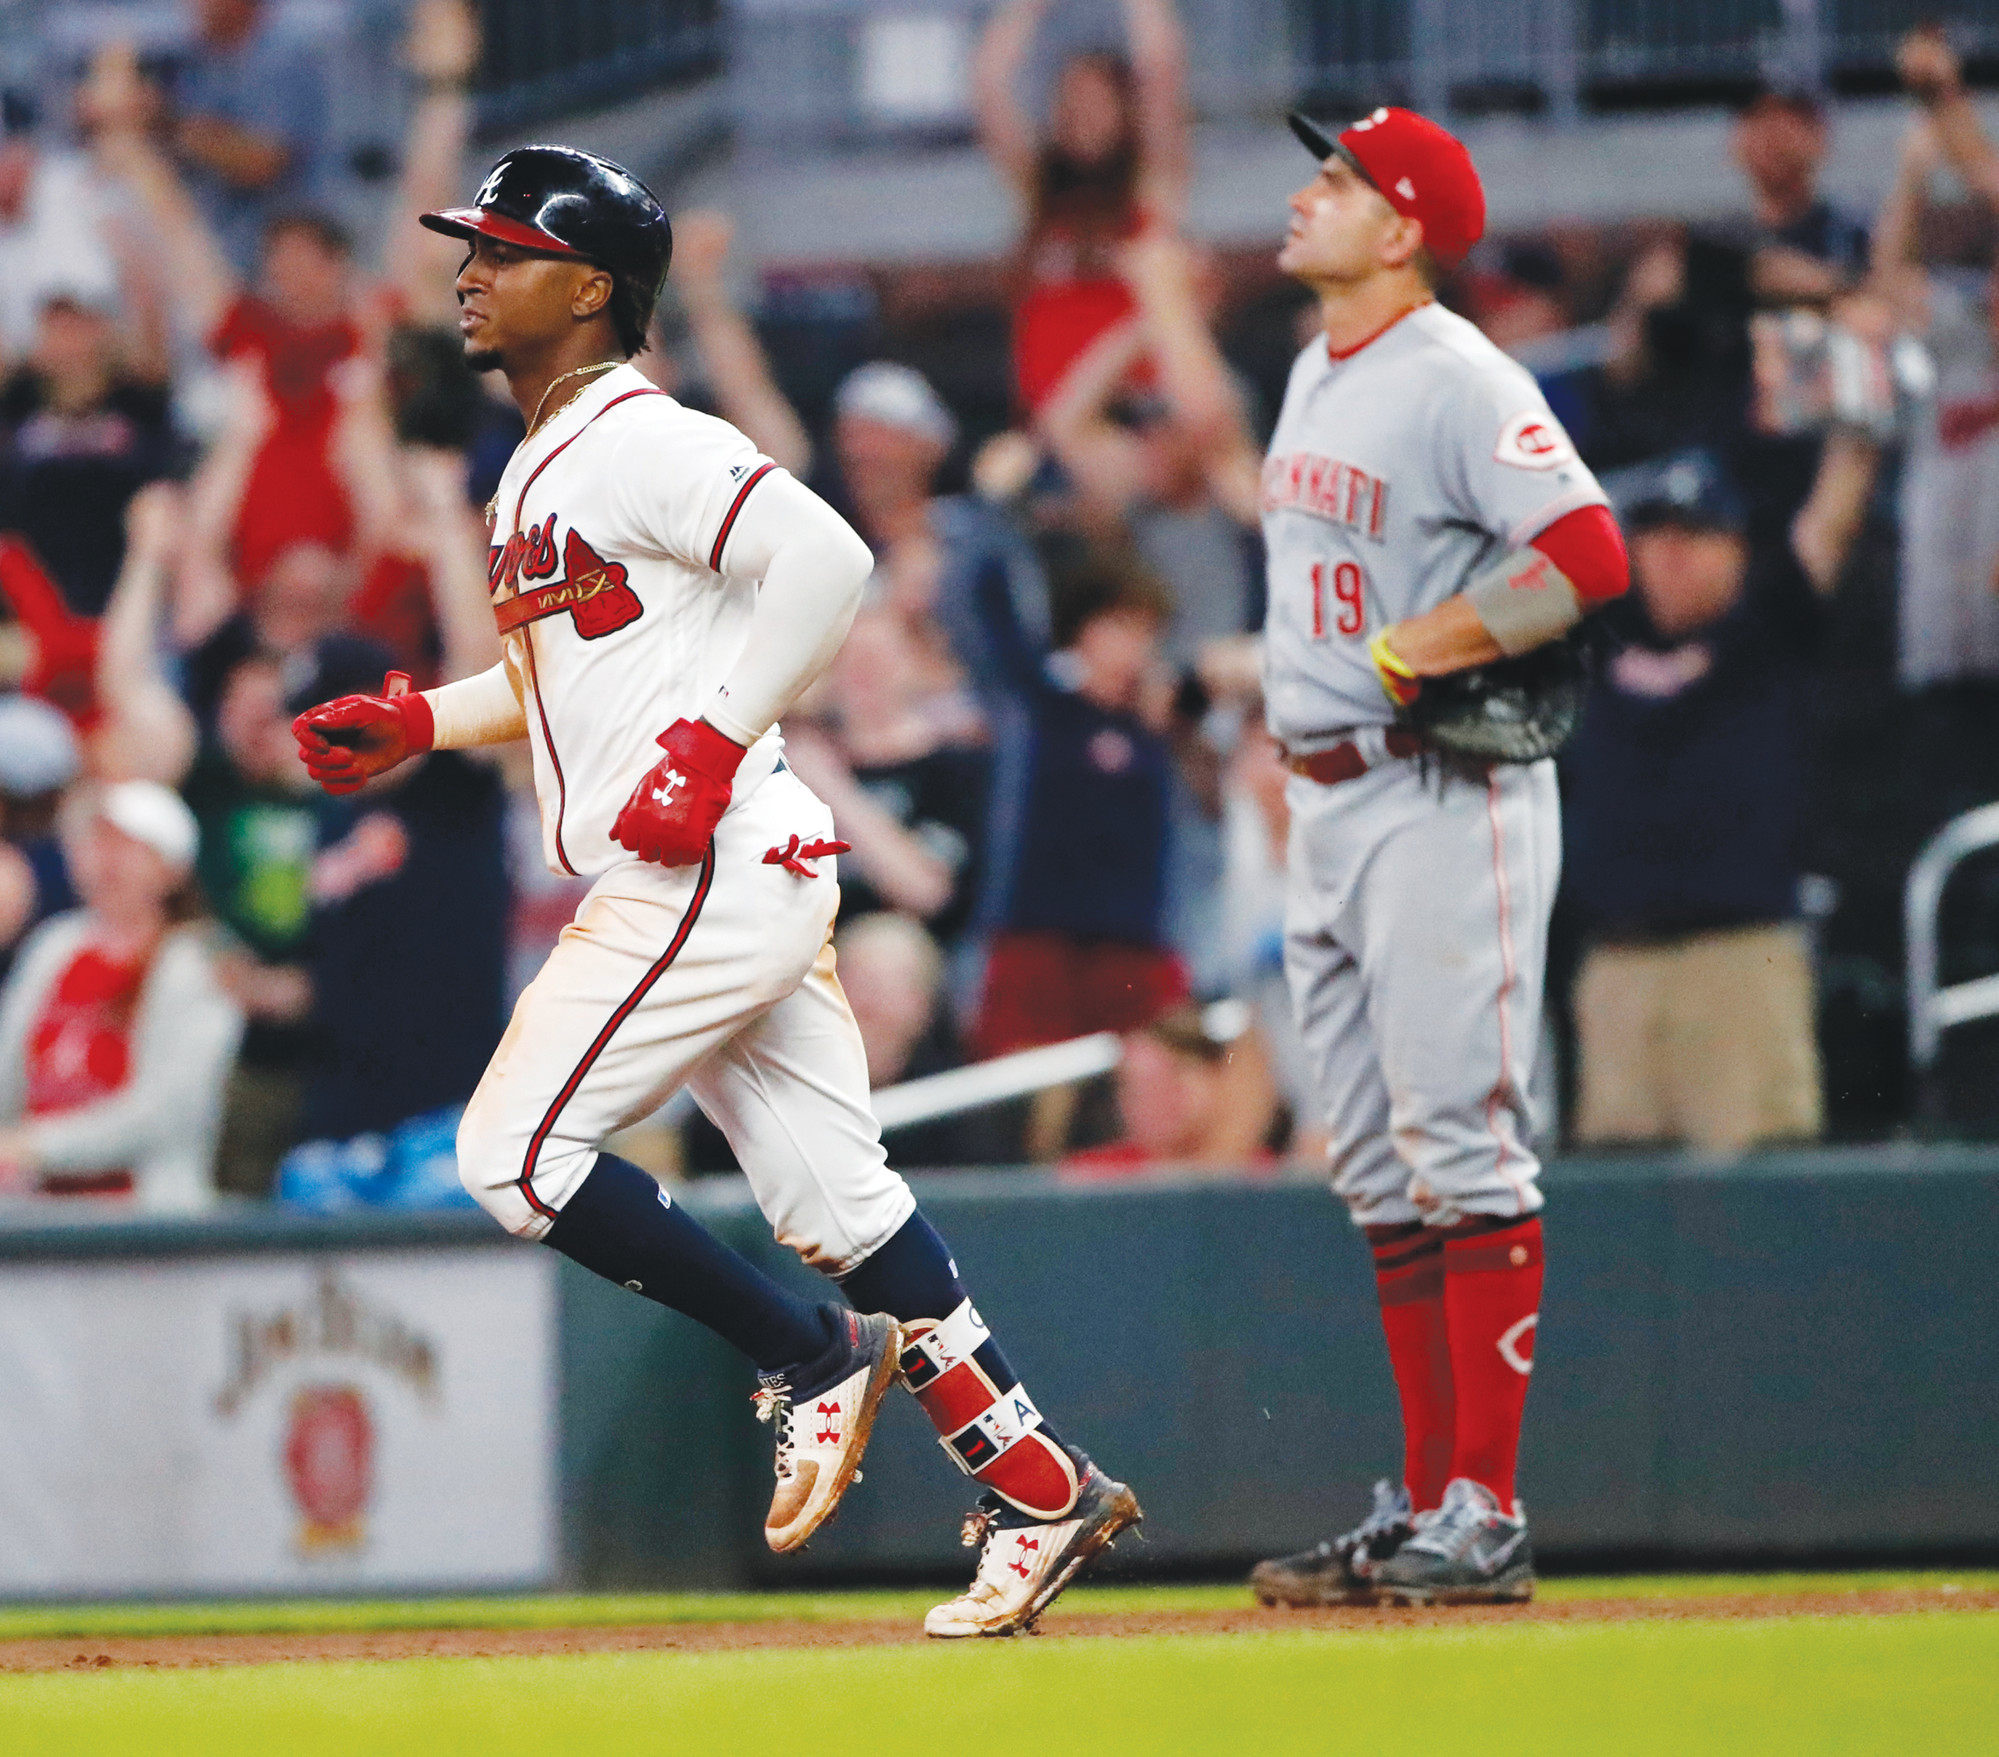 Albies wins it for Braves with solo homer in 11th inning - The